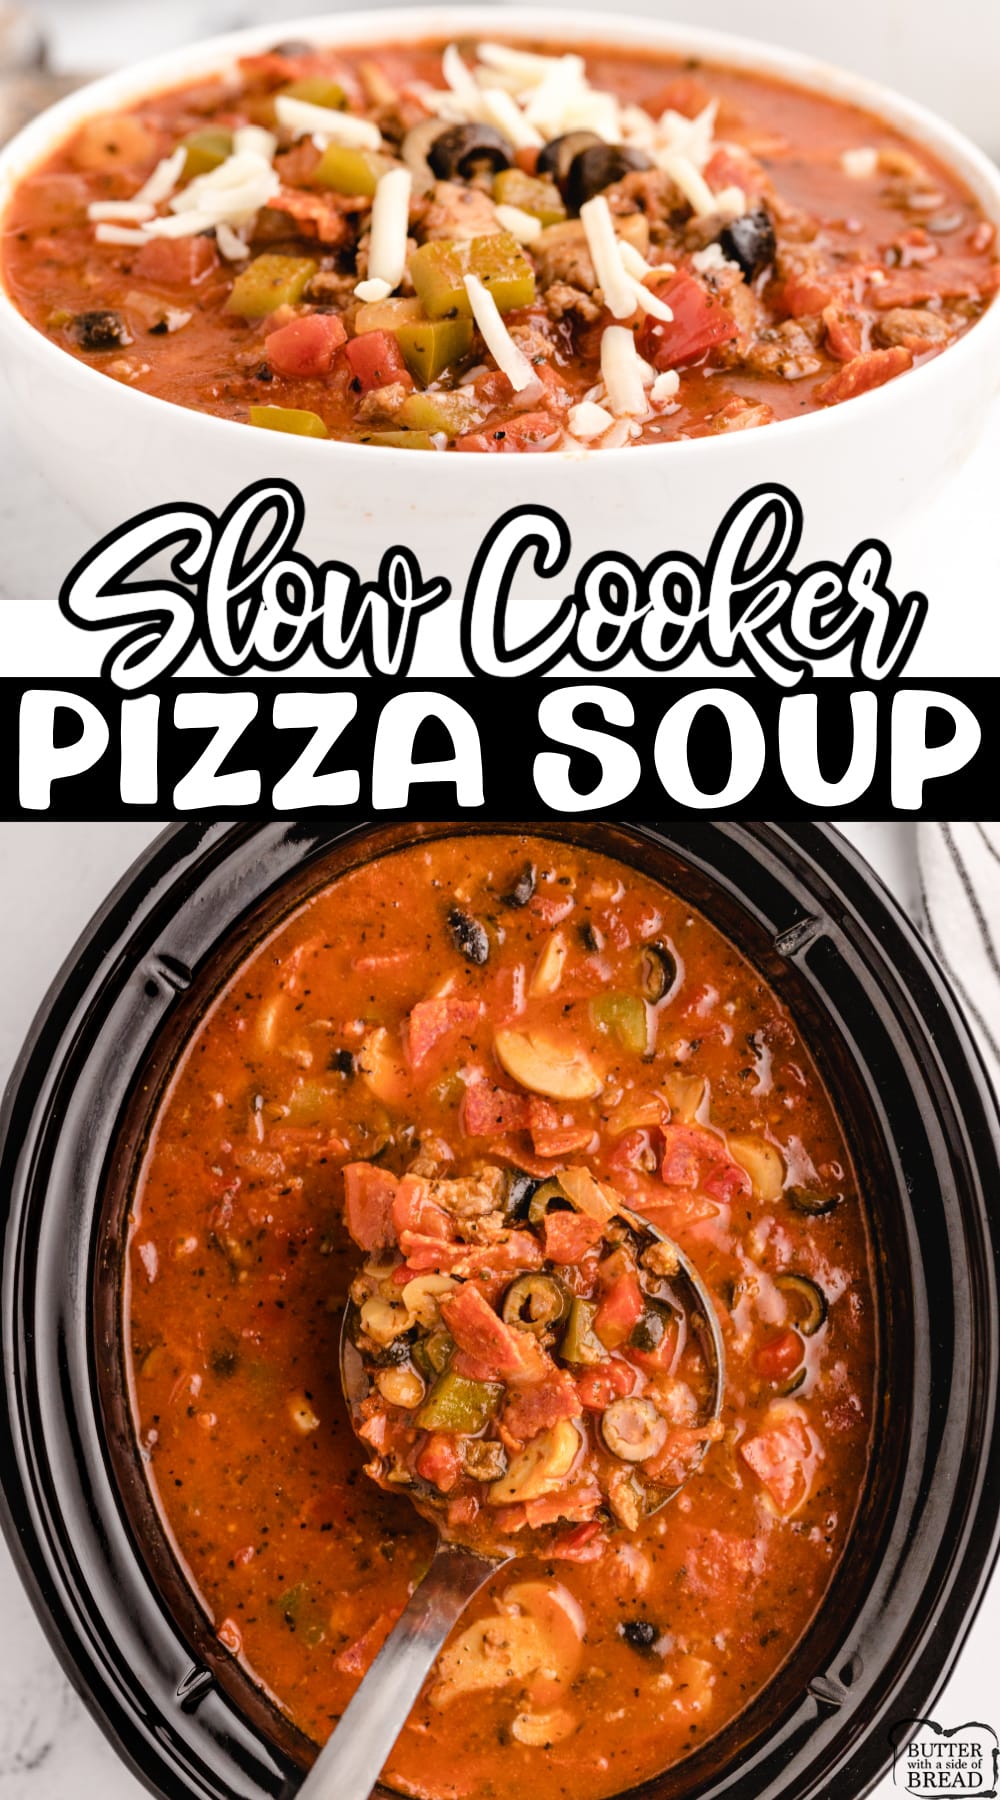 Slow Cooker Pizza Soup is a filling and comforting soup that is full of your favorite pizza flavors. Making this slow cooker pizza soup recipe  is so simple - combine the ingredients and the crockpot does all the work! 